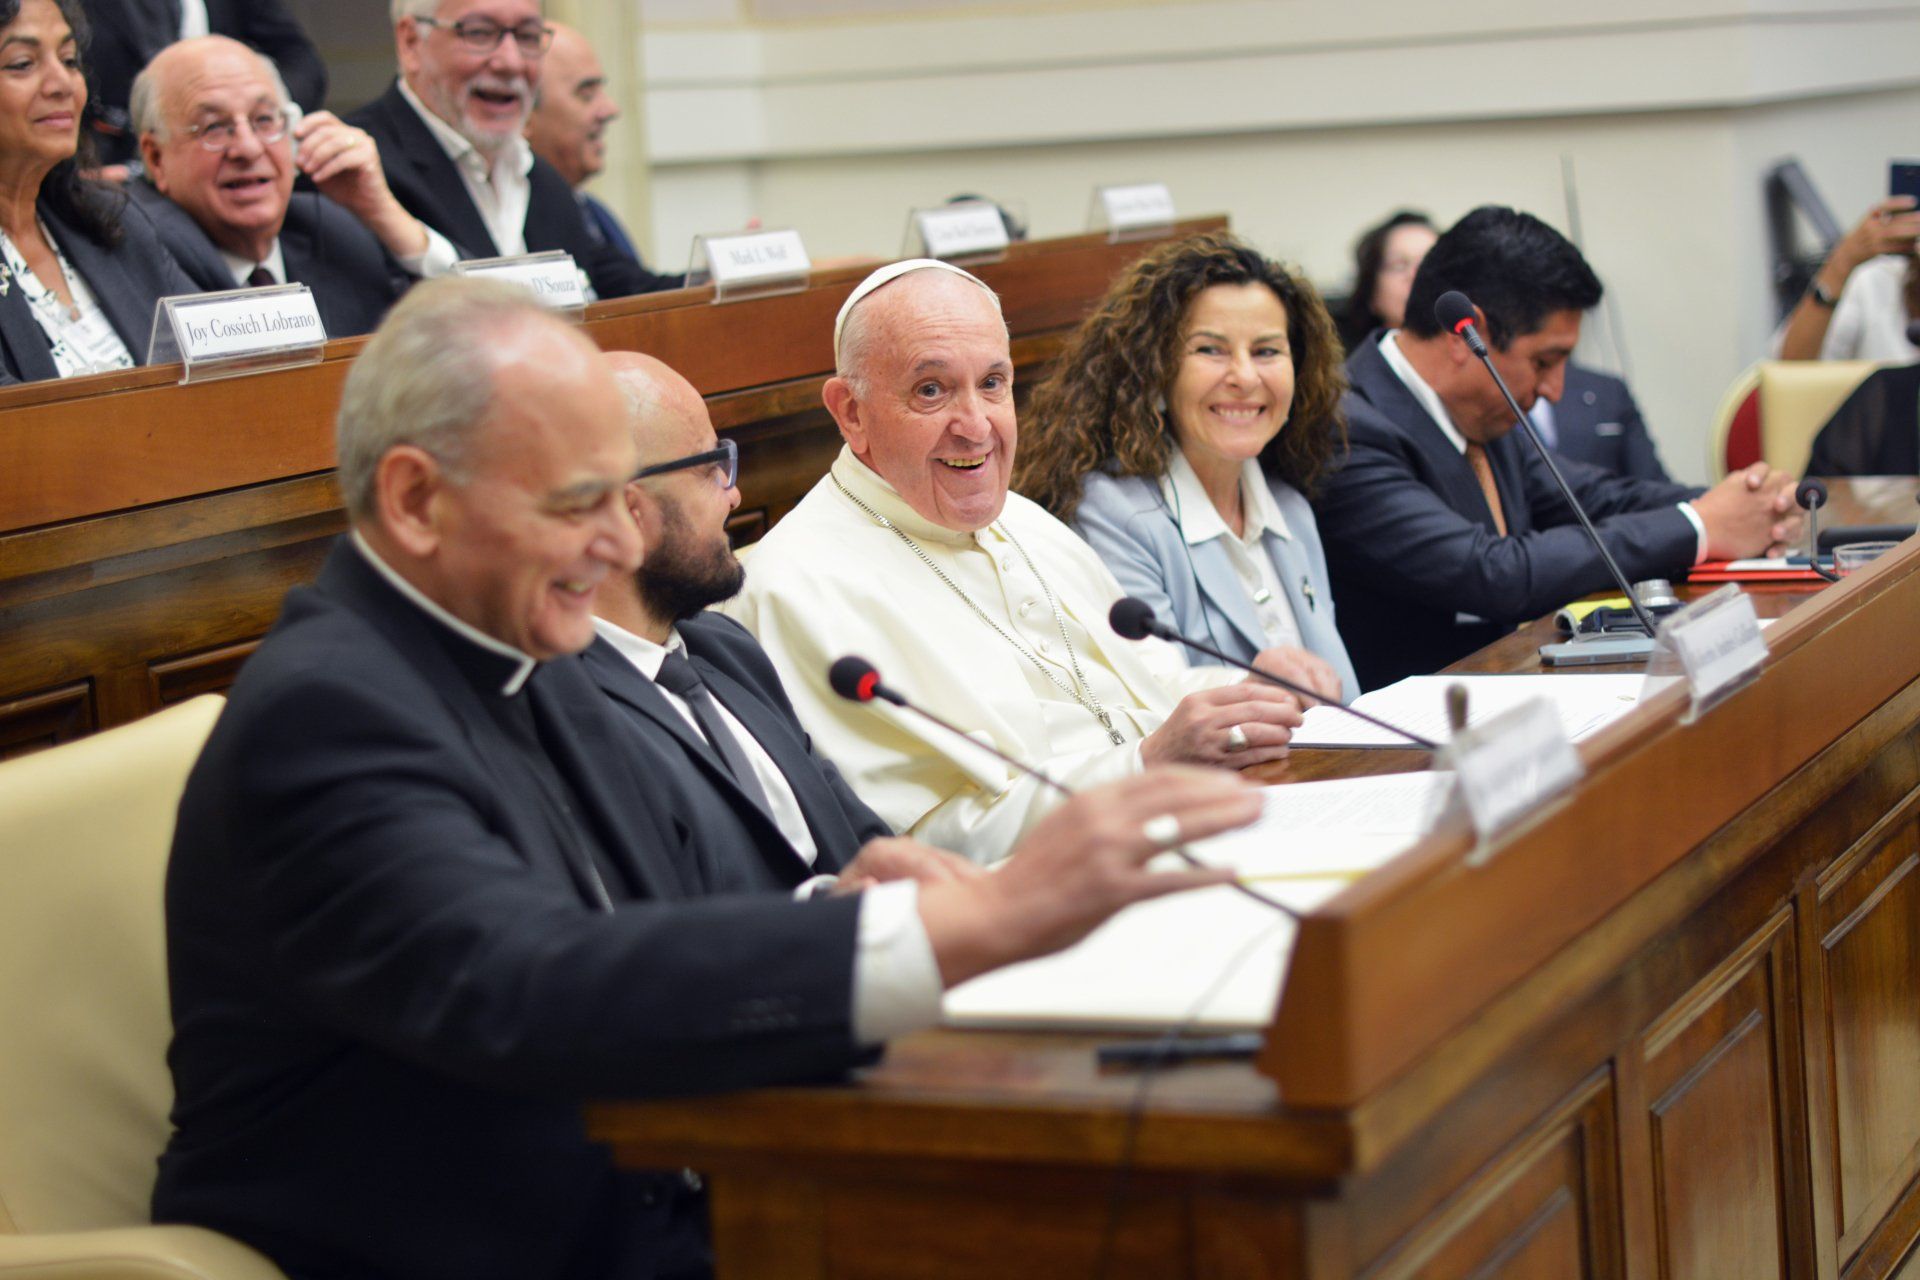 PAN-AMERICAN JUDGES’ SUMMIT ON SOCIAL RIGHTS AND FRANCISCAN DOCTRINE ROME STATEMENT